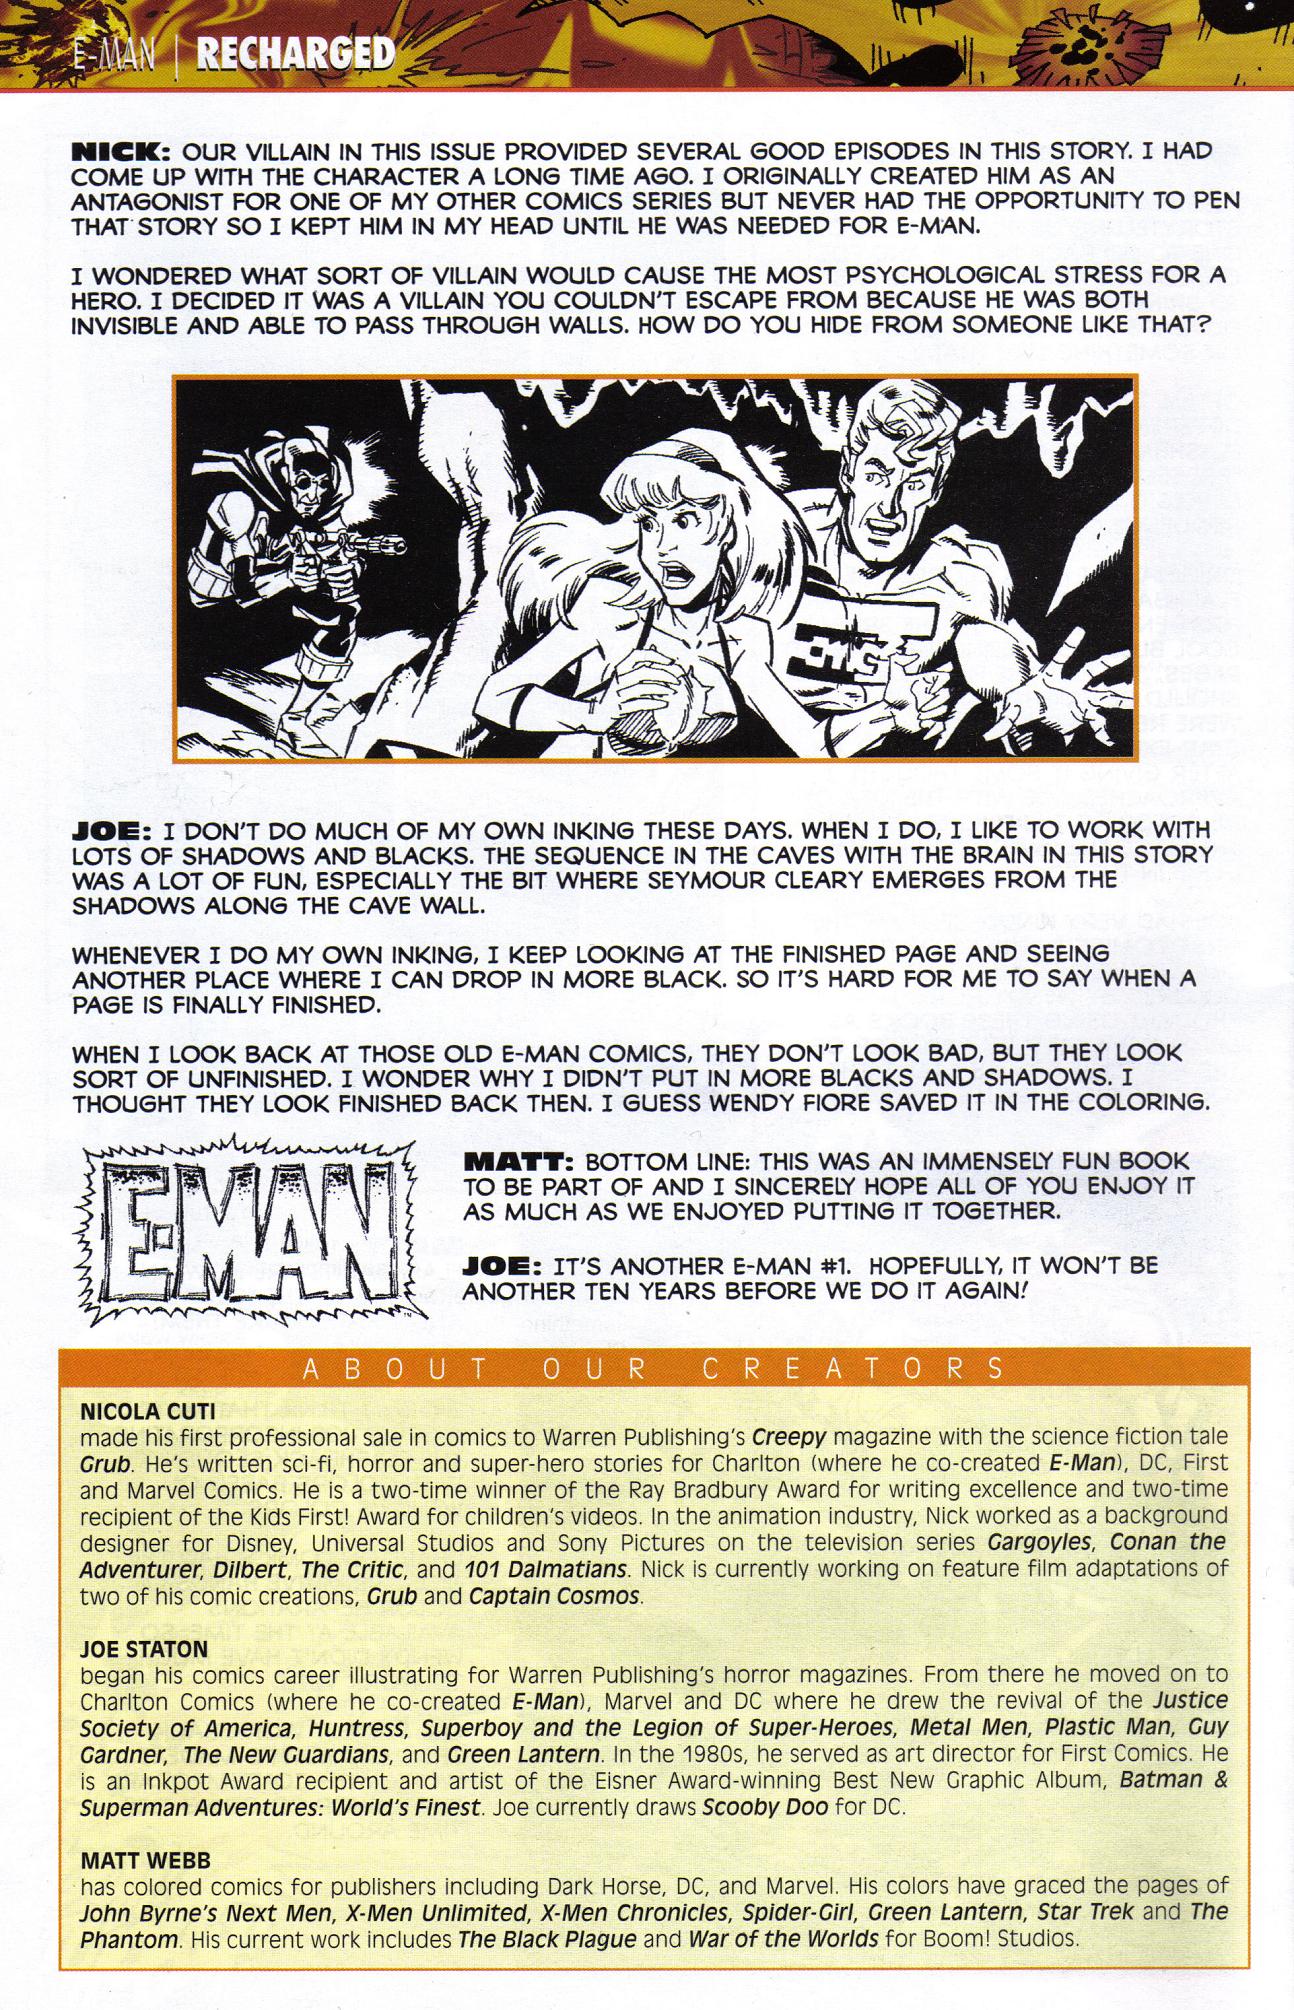 Read online E-Man: Recharged comic -  Issue # Full - 32